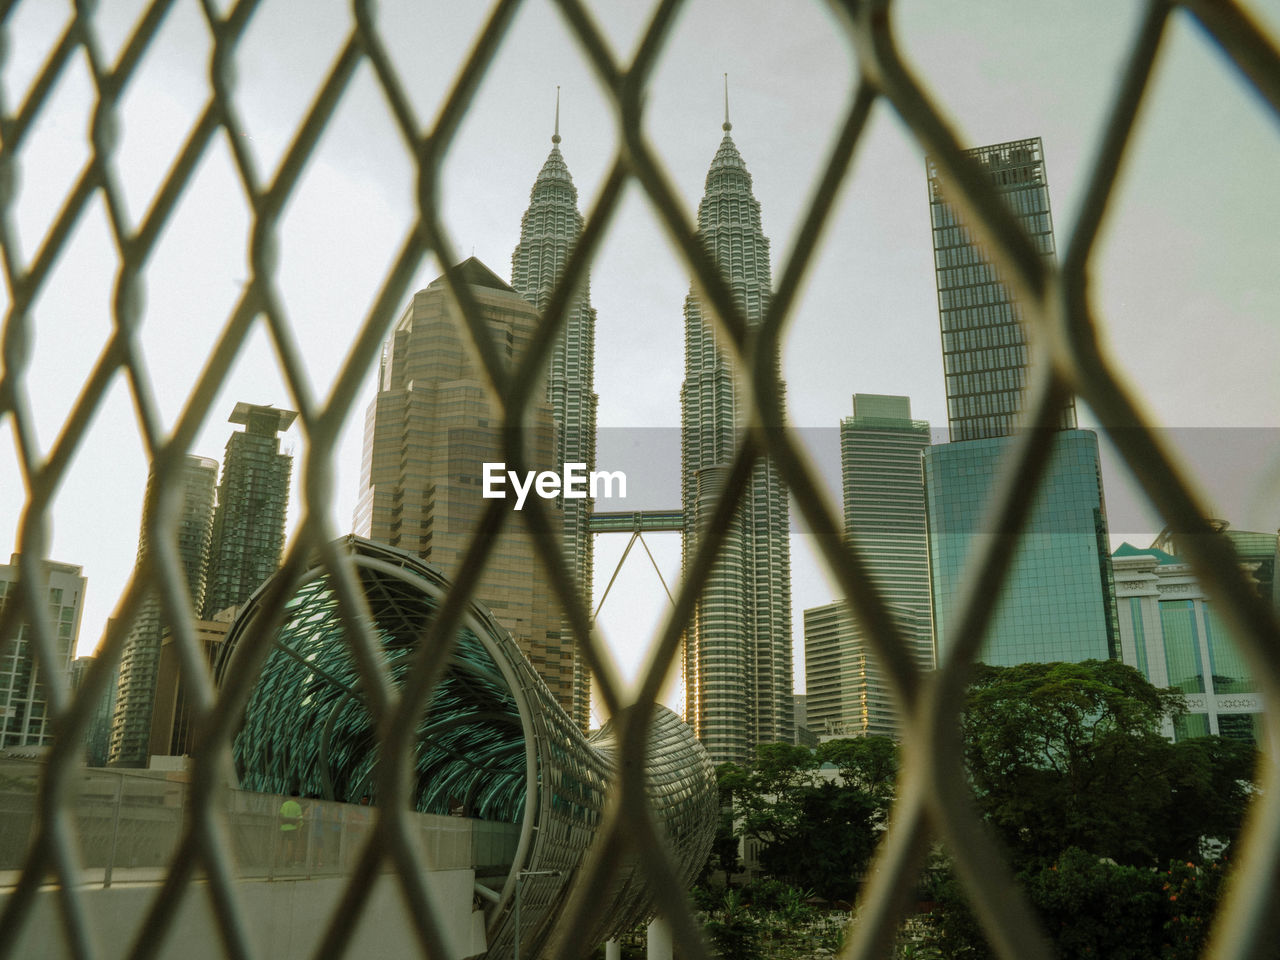 Panoramic shot of buildings seen through chainlink fence